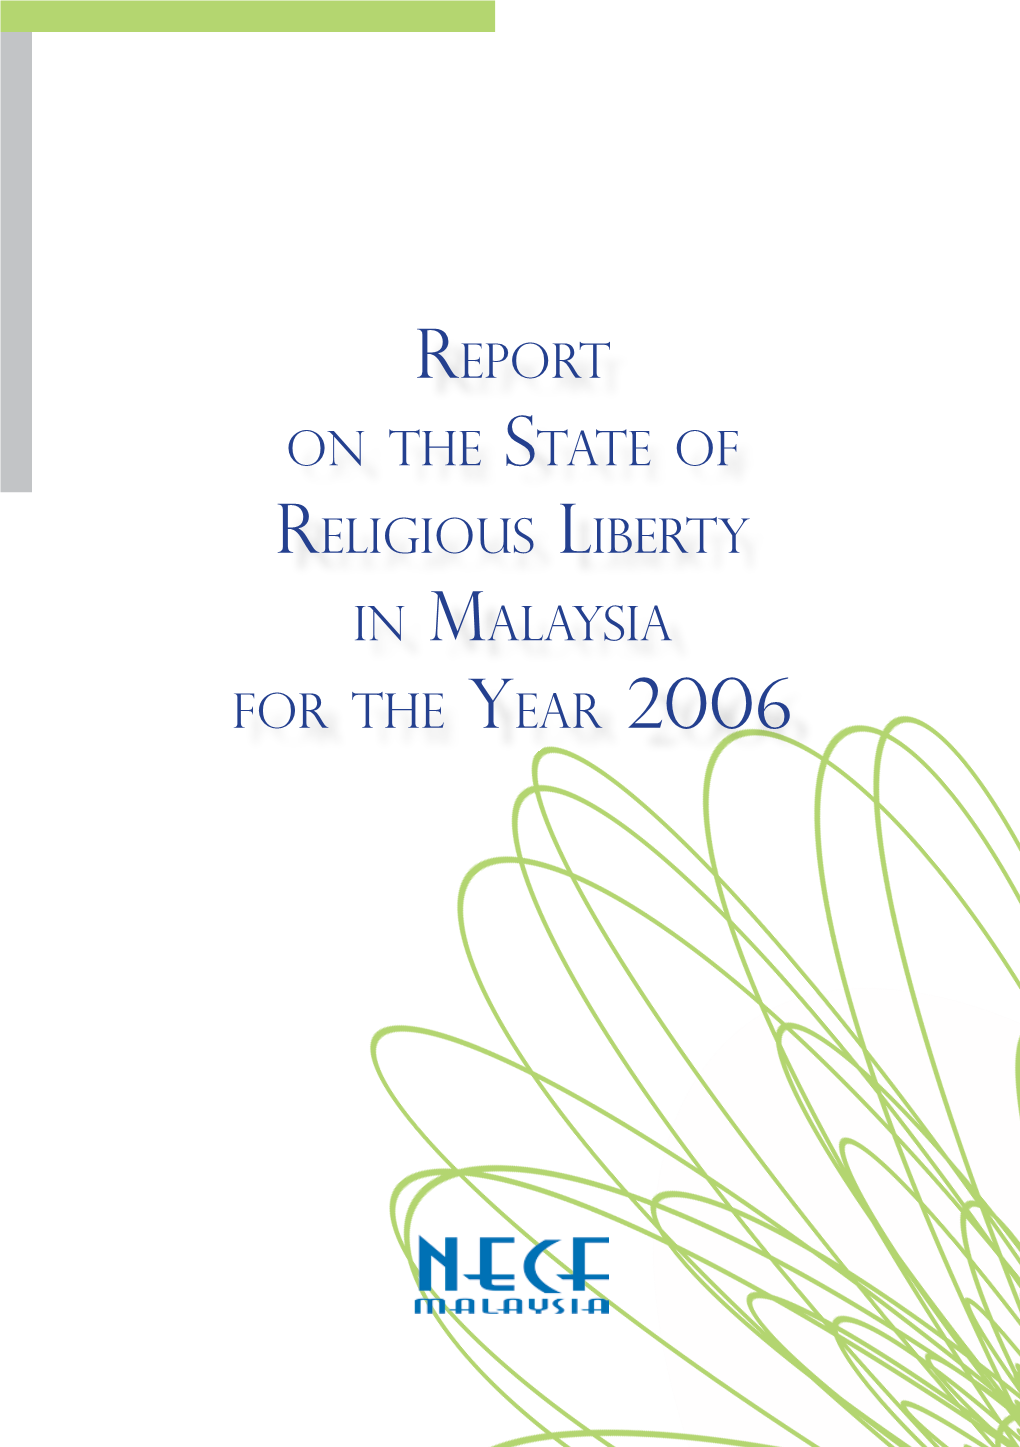 To View the Report